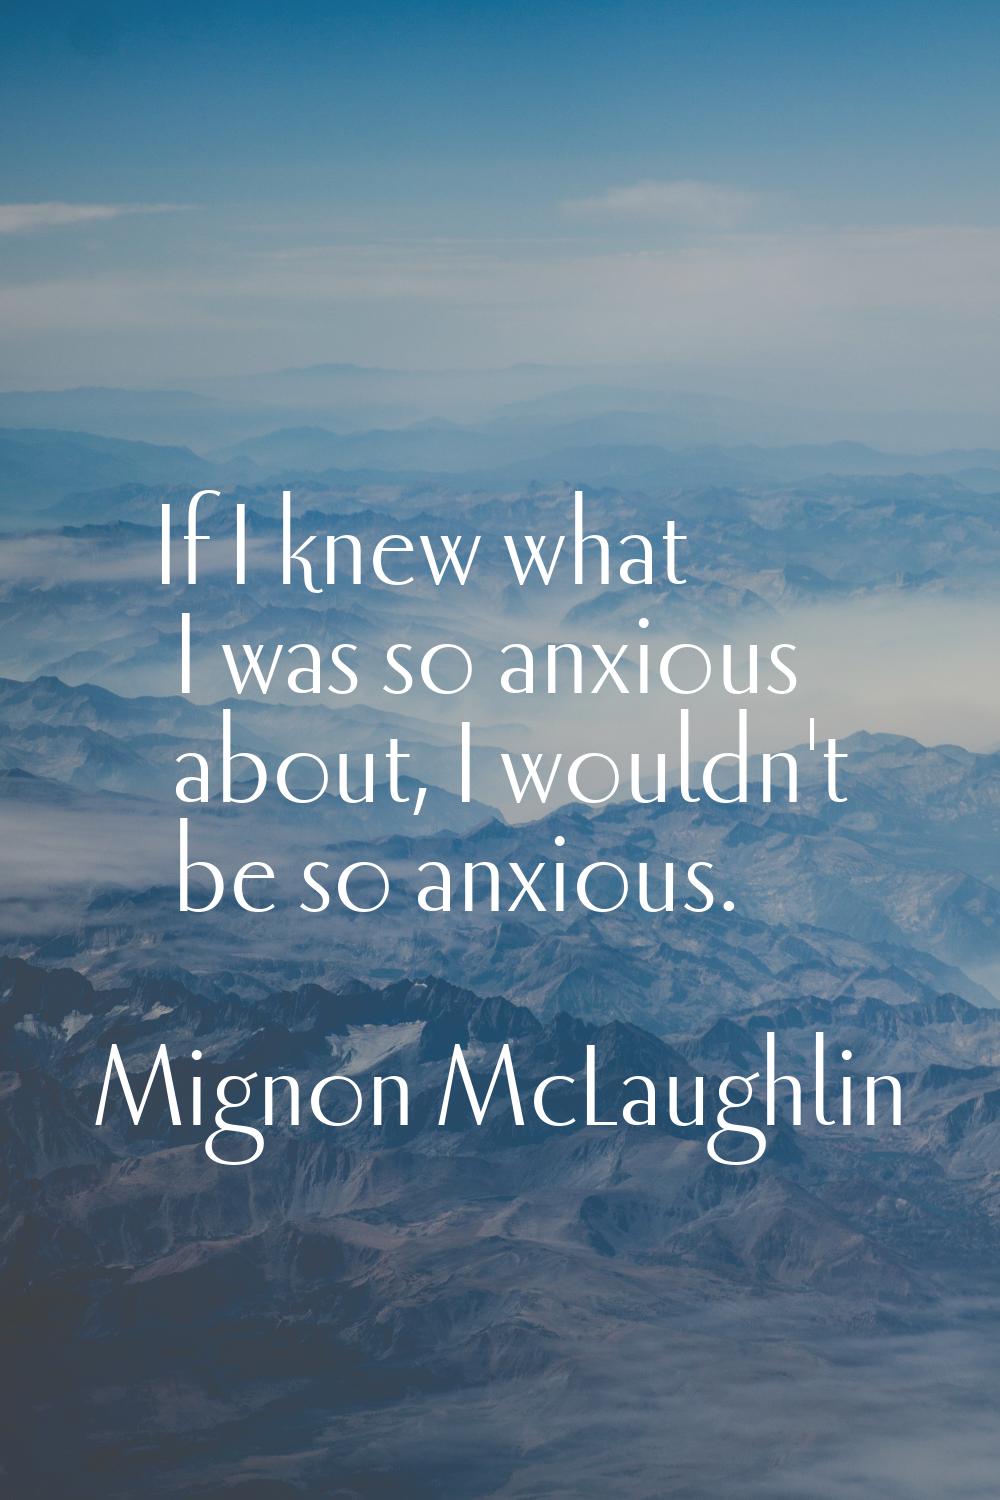 If I knew what I was so anxious about, I wouldn't be so anxious.